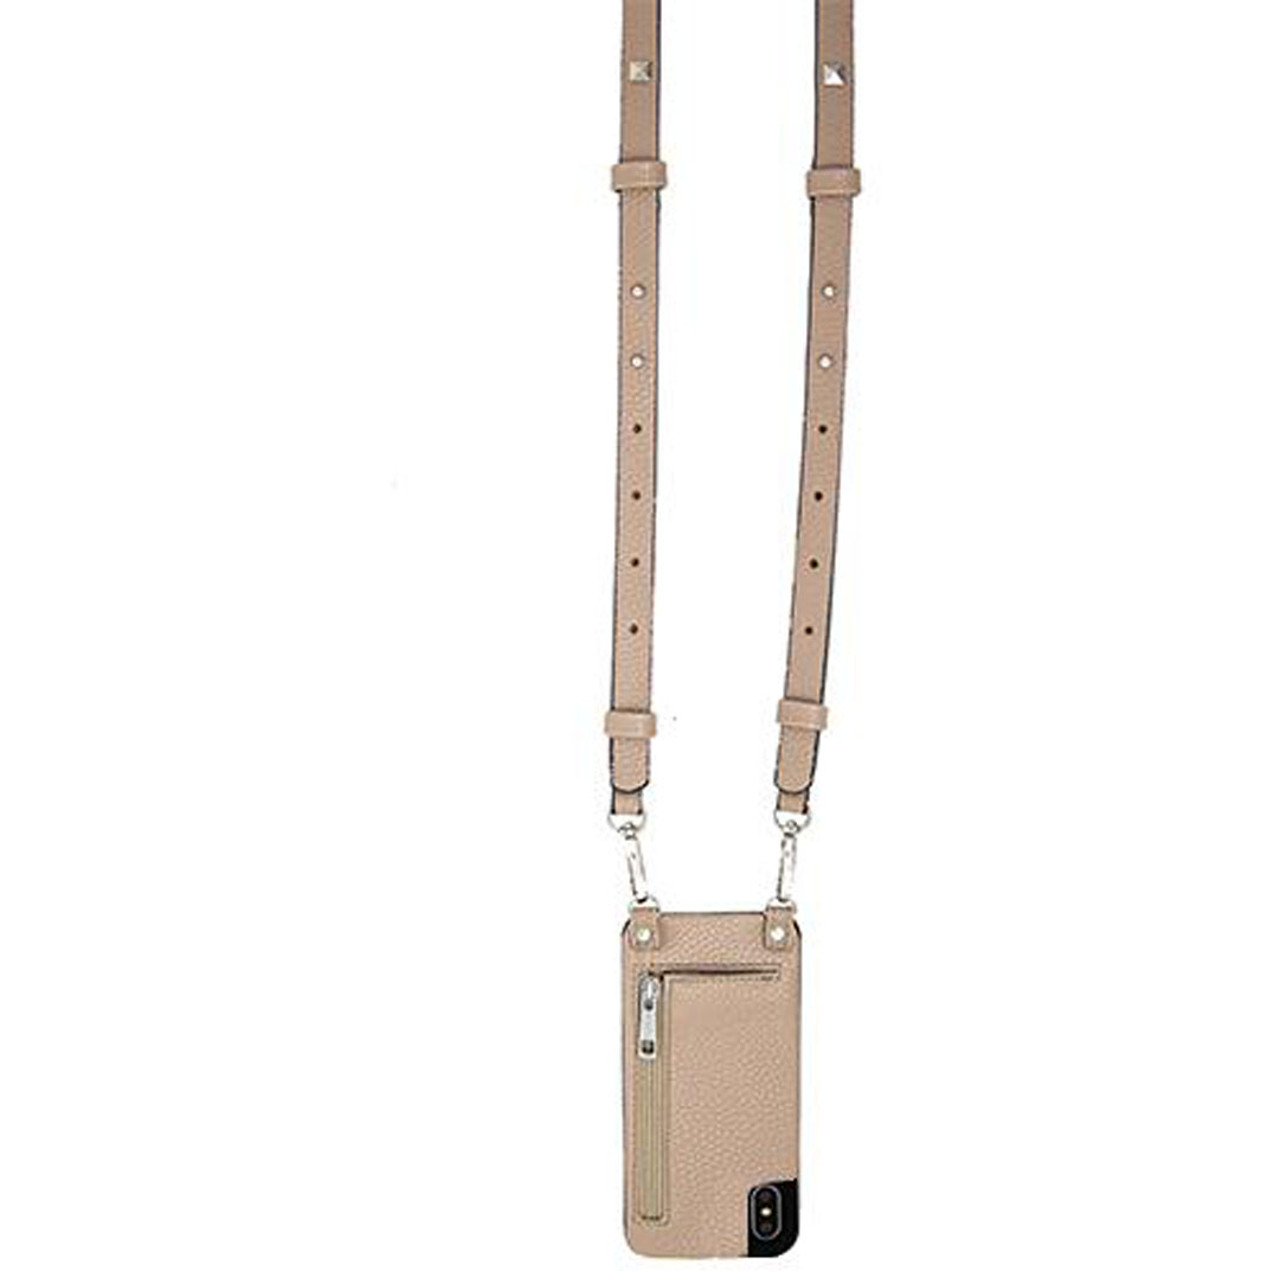 Hera Cases: Crossbody Phone Case & Strap - iPhone XR - Taupe